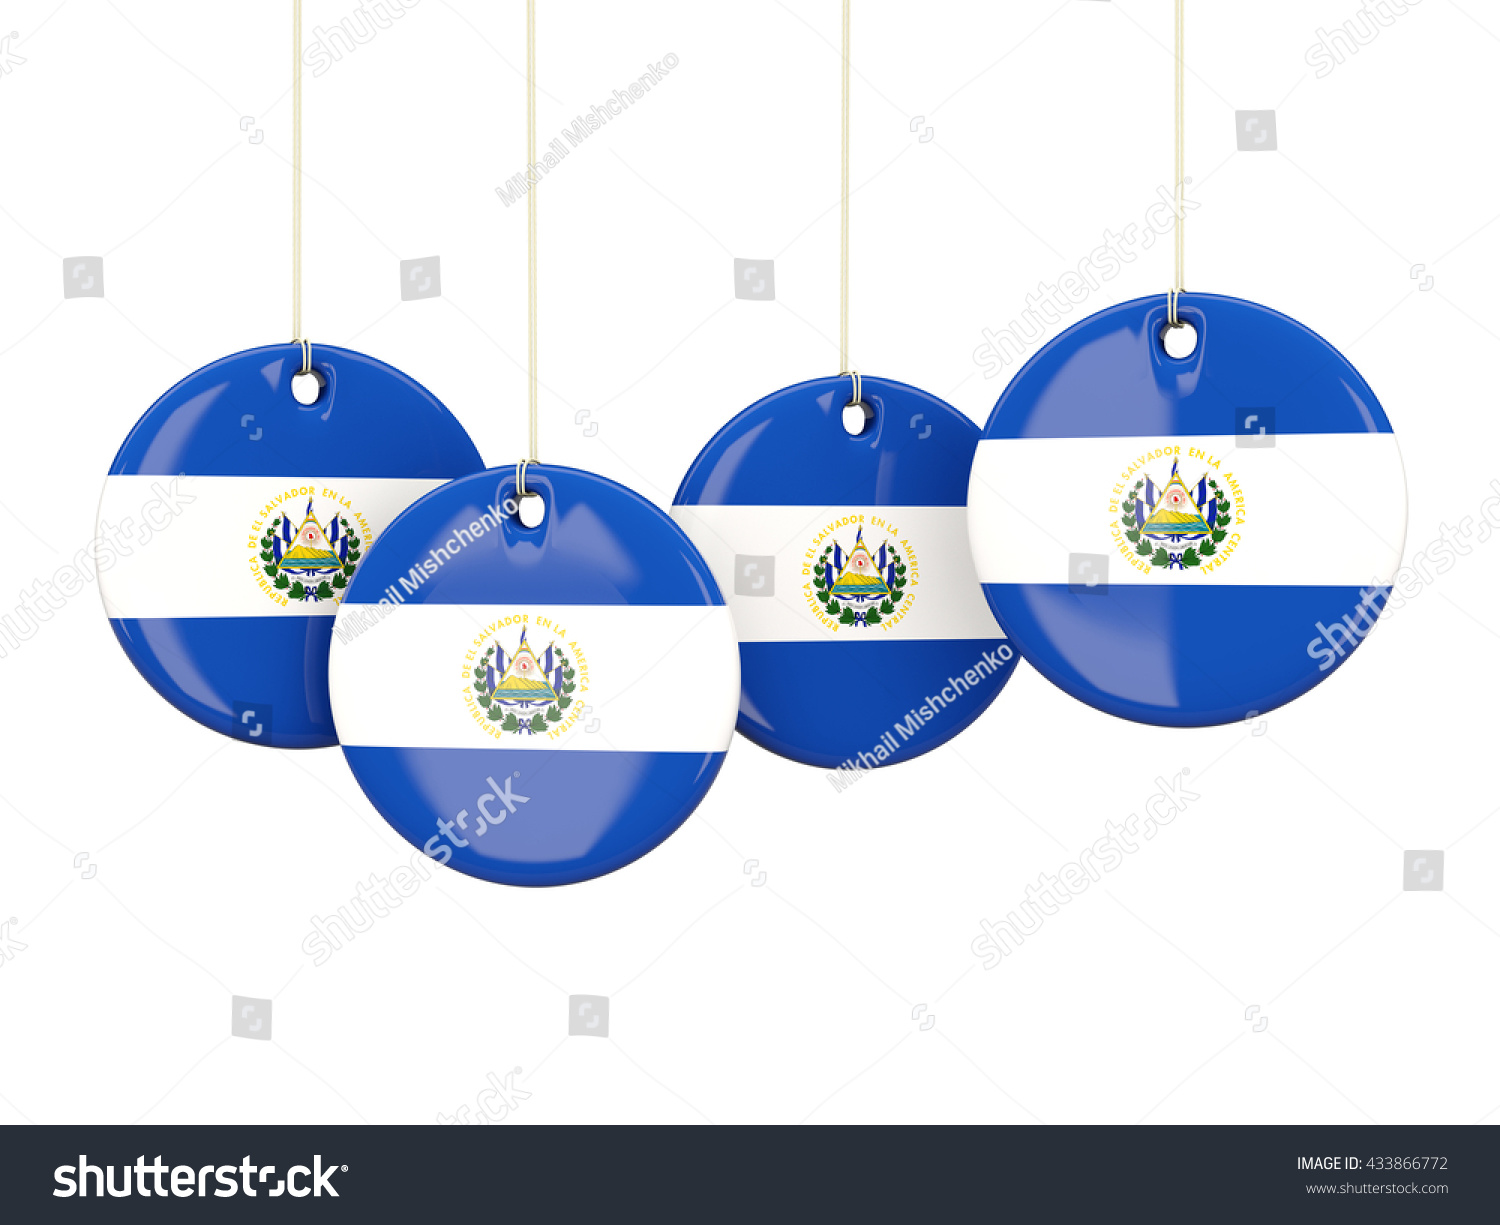 flag-of-el-salvador-round-labels-on-white-3d-royalty-free-stock